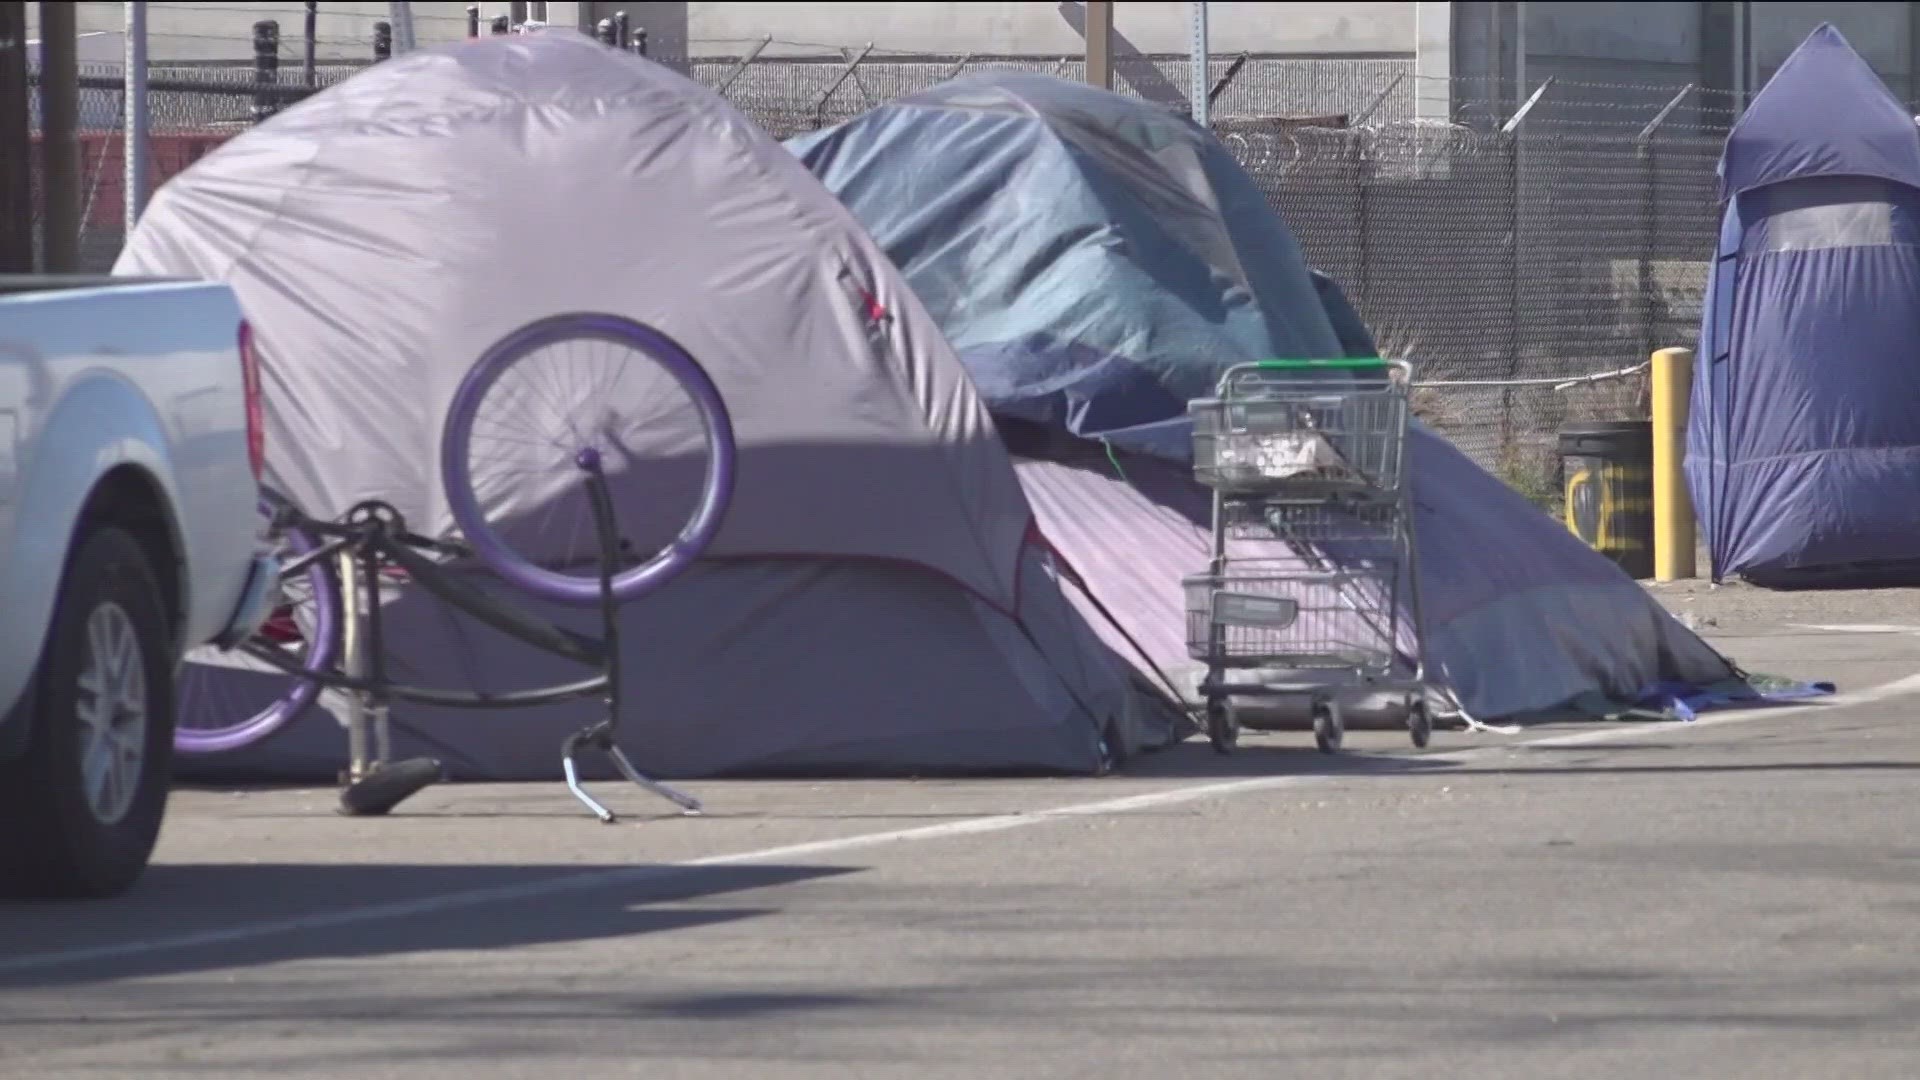 City Council's proposed law would ban all homeless encampments. Homeless advocates gather outside city hall Tuesday to protest the ban.